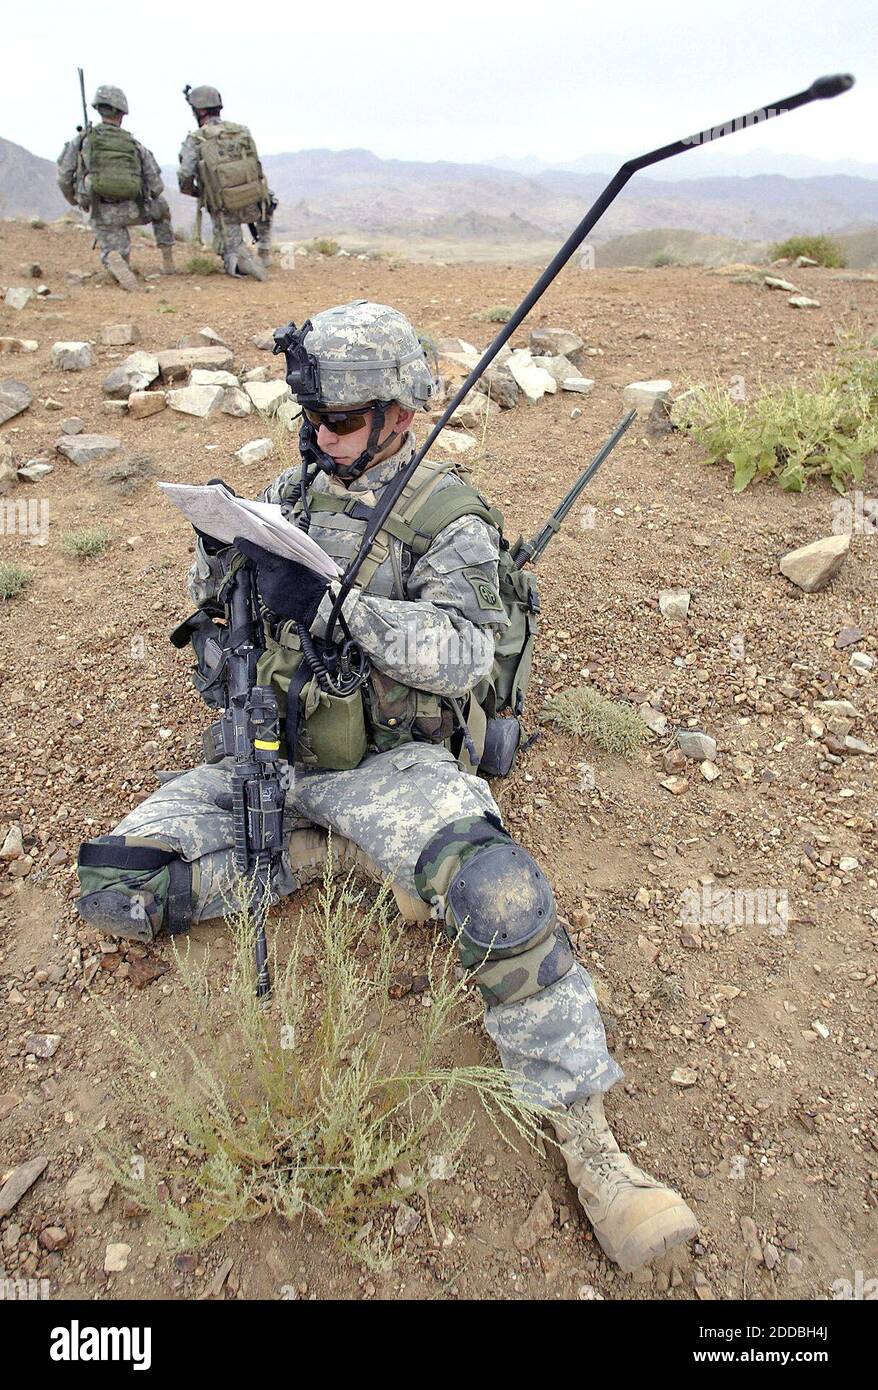 NO FILM, NO VIDEO, NO TV, NO DOCUMENTARY - Sgt. Drew Schaub, of the 82nd Airborne Division, makes radio contact with the Tactical Operations Center from the mountain top during a mission high in the mountains in Zabul Province, Afghanistan, August 8, 2005. A roadside bomb attack killed four U.S. soldiers and wounded three others in southern Afghanistan on Sunday, August 21, 2005, as Taliban insurgents pressed an escalating guerrilla war nearly four years after their radical Islamic movement was swept from power. Photo by Tom Pennington/Fort Worth Star-Telegram/KRT/ABACAPRESS.COM. Stock Photo